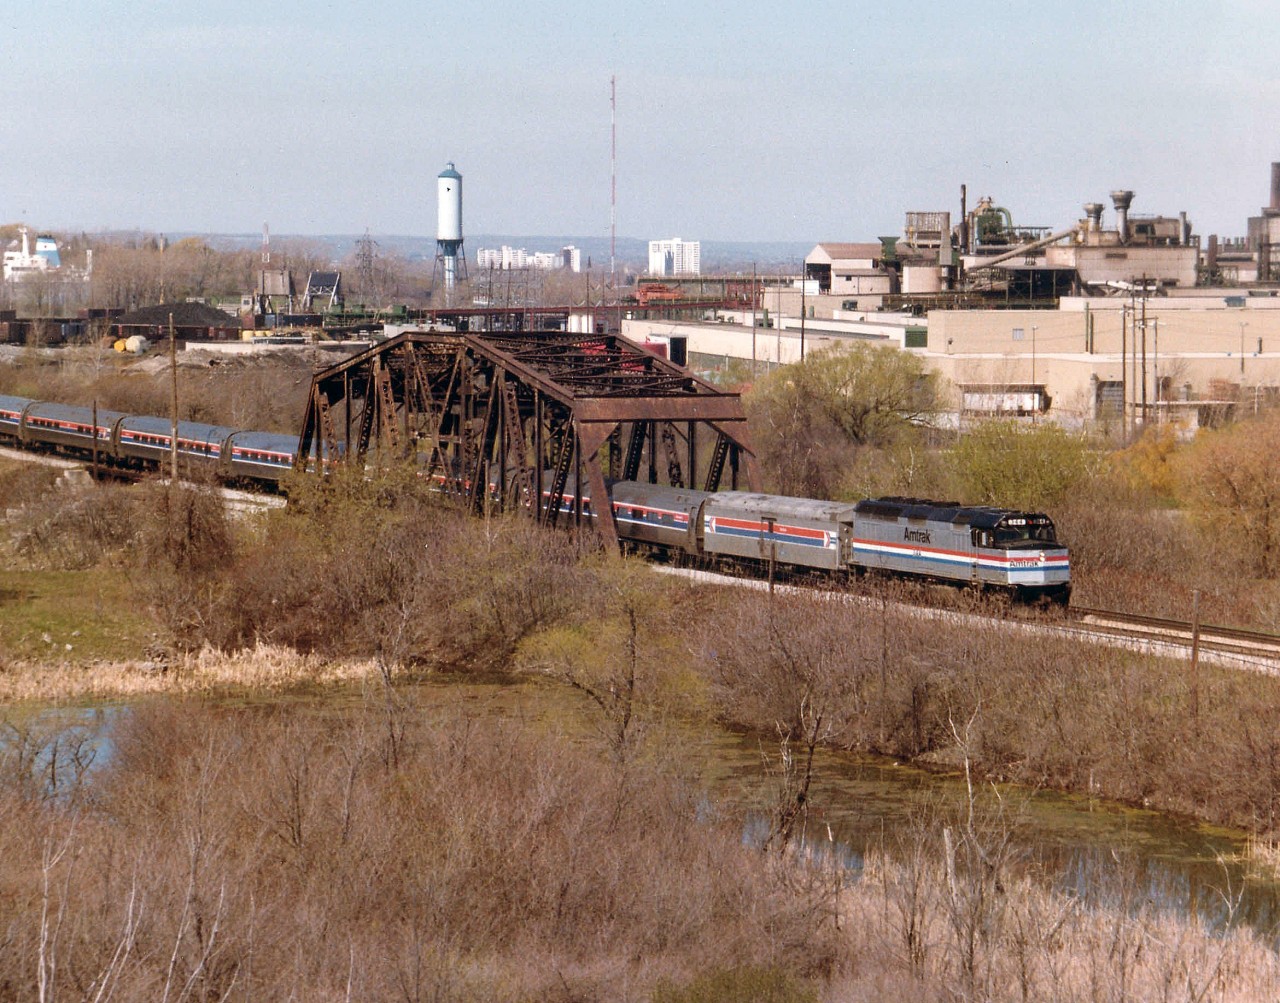 This is the First Run of the Maple Leaf thru Niagara over the CN Grimsby Sub. The train is shown eastbound crossing the trestle known on the timetable as "CN Iron Bridge", with the GM #2 plant dominating the background. On the left is the Welland Canal Lift Bridge #6, and the superstructure of a Lake Erie -bound ship can be seen. This photo was shot from up in now off-limits property of Walker Industries quarry, and is an impossible angle these days. Because this is a first run, the total consist was noted: AMTK Loco 344, baggage, 1370 and coaches 21126, 21148, 21071, 21054, 20224 and 21107.